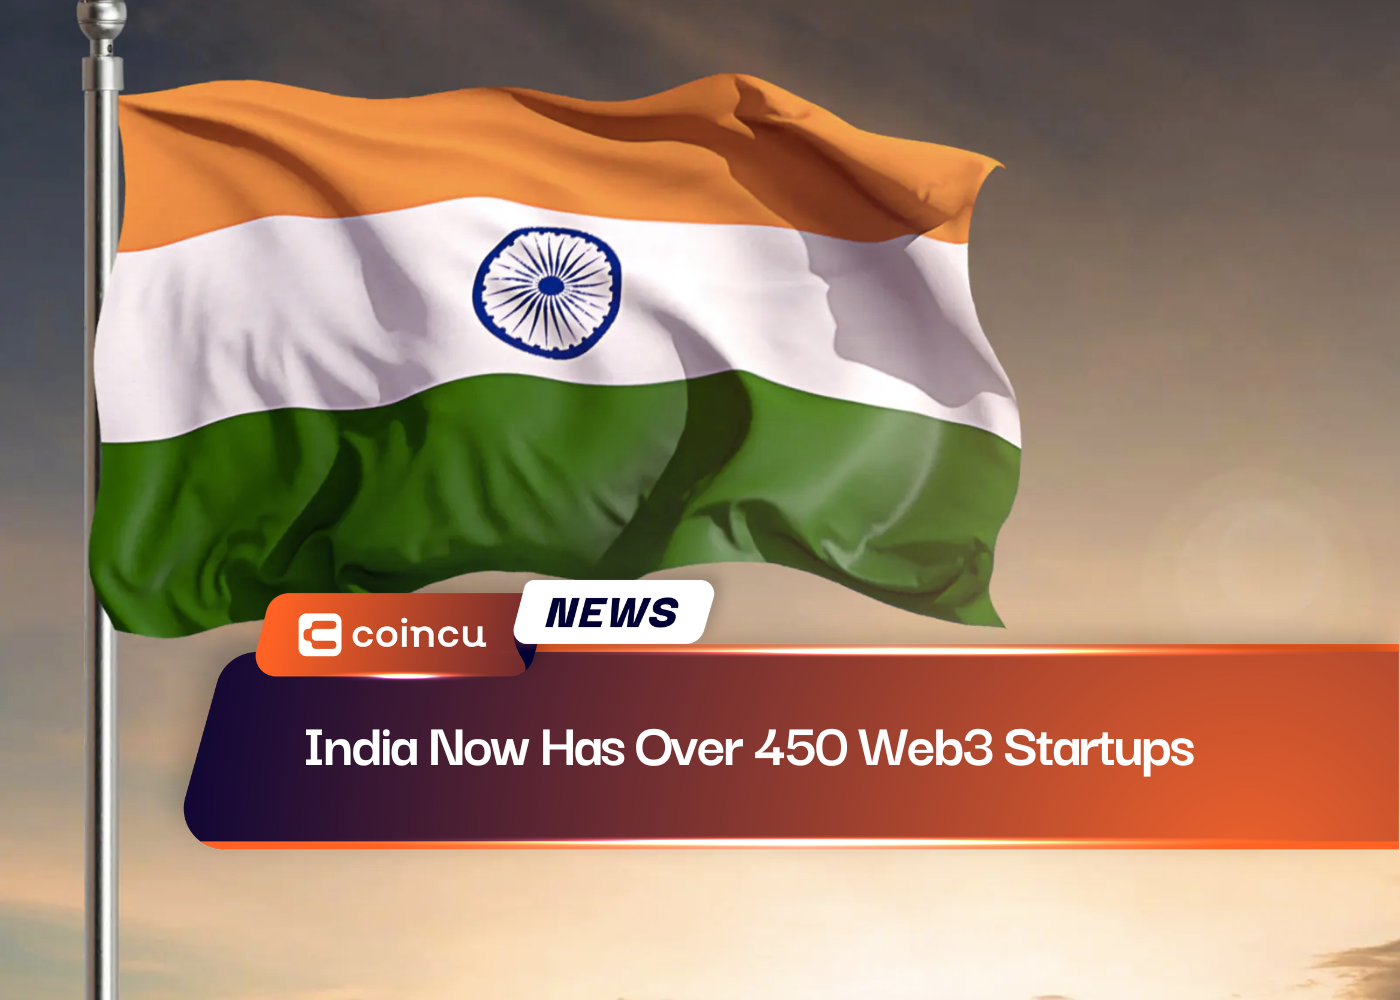 India Now Has Over 450 Web3 Startups